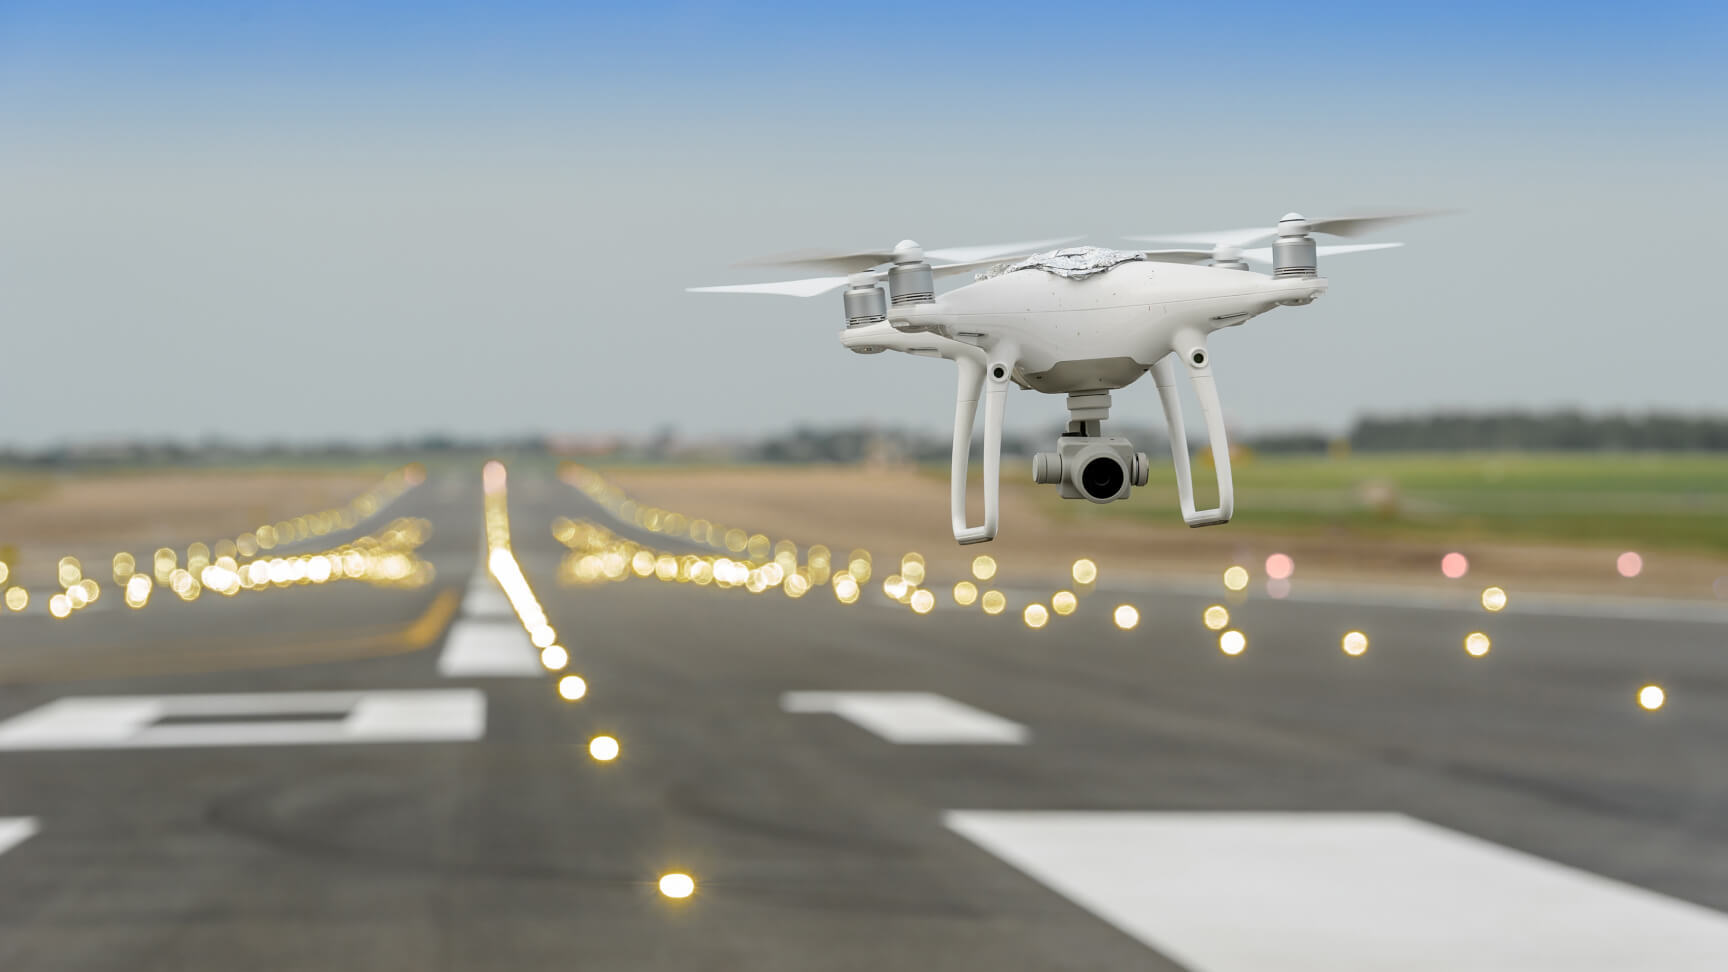 Drones and Airplanes: A Growing Threat to Aviation Safety